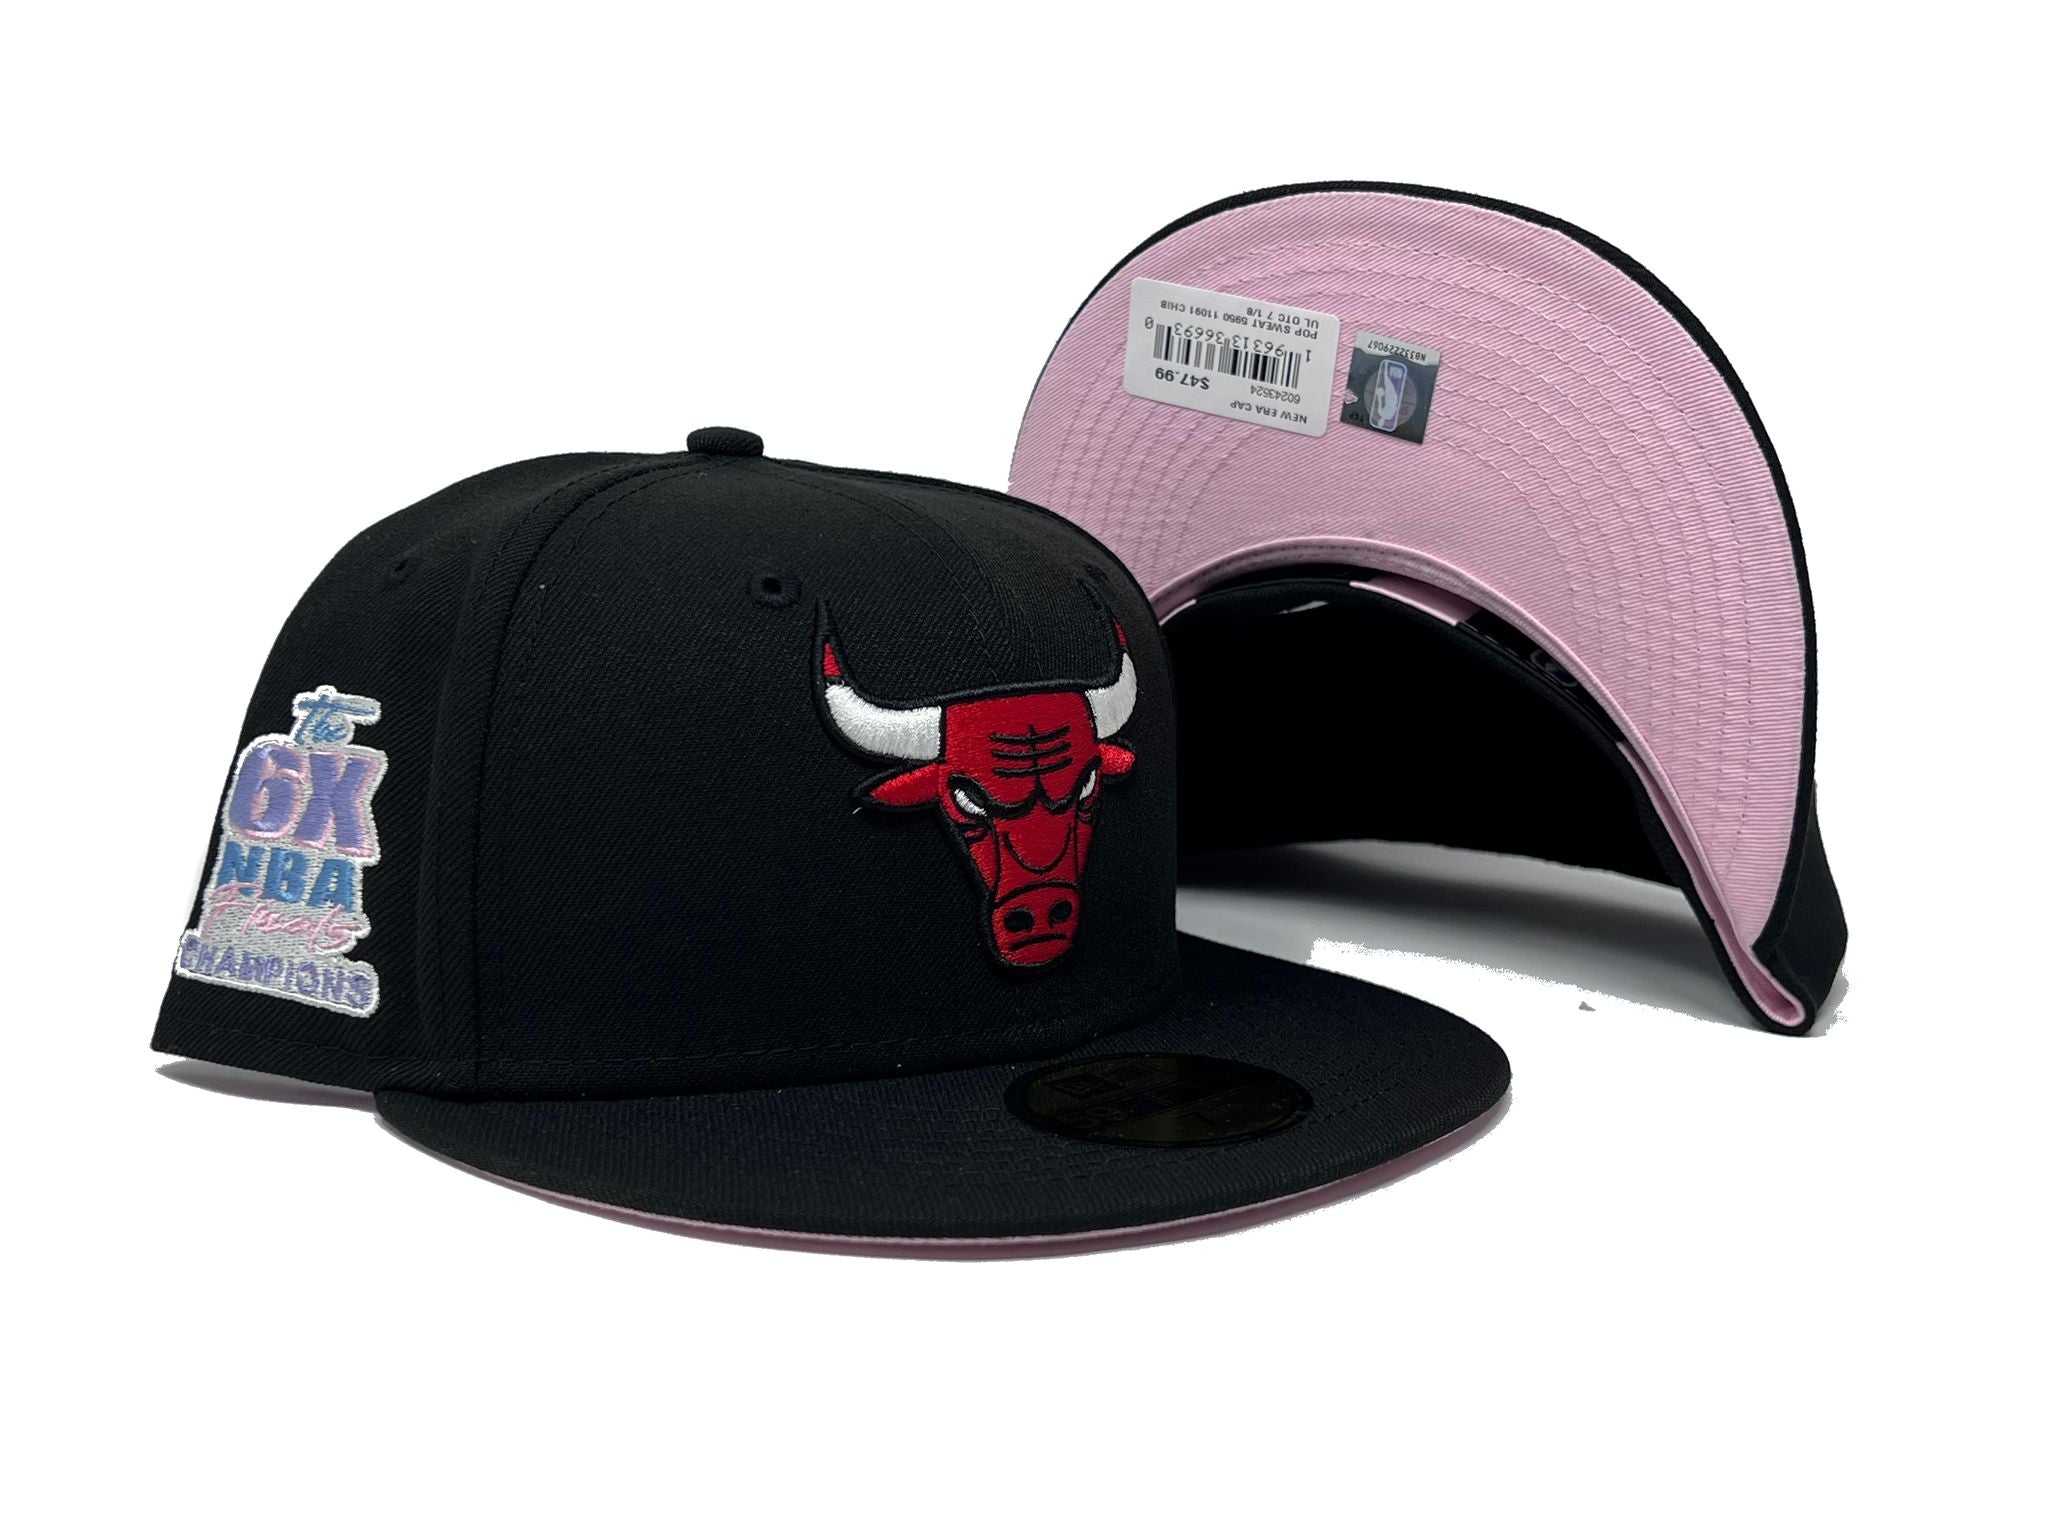 Chicago Bulls New Era Color Pop 59FIFTY Fitted Hat - Gray